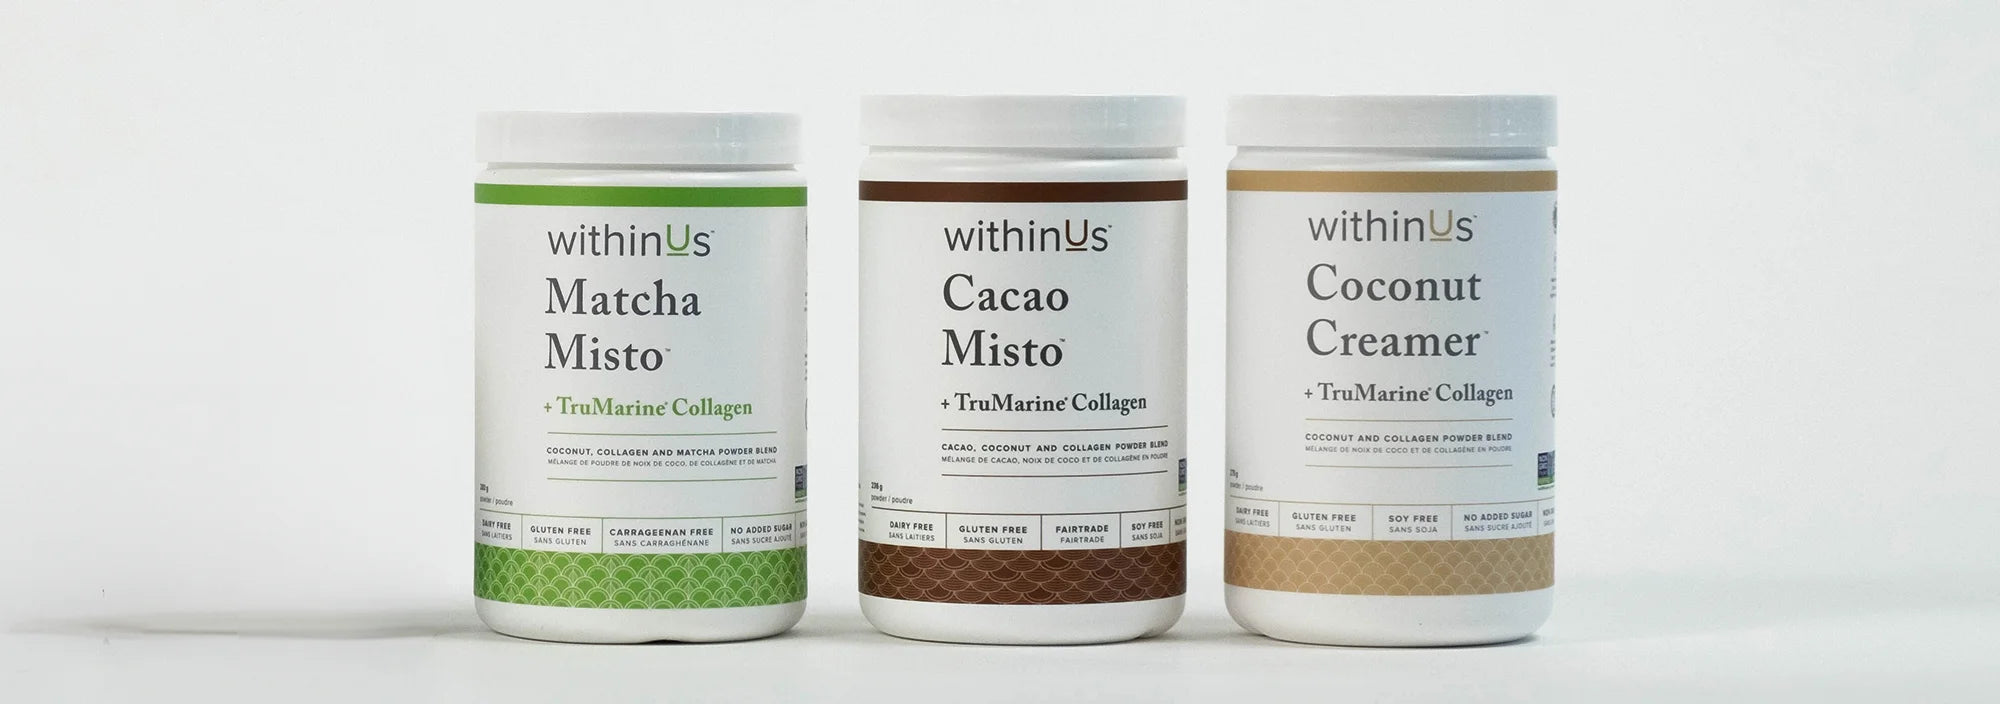 Elevate Your Wellness with withinUs +TruMarine Collagen Products